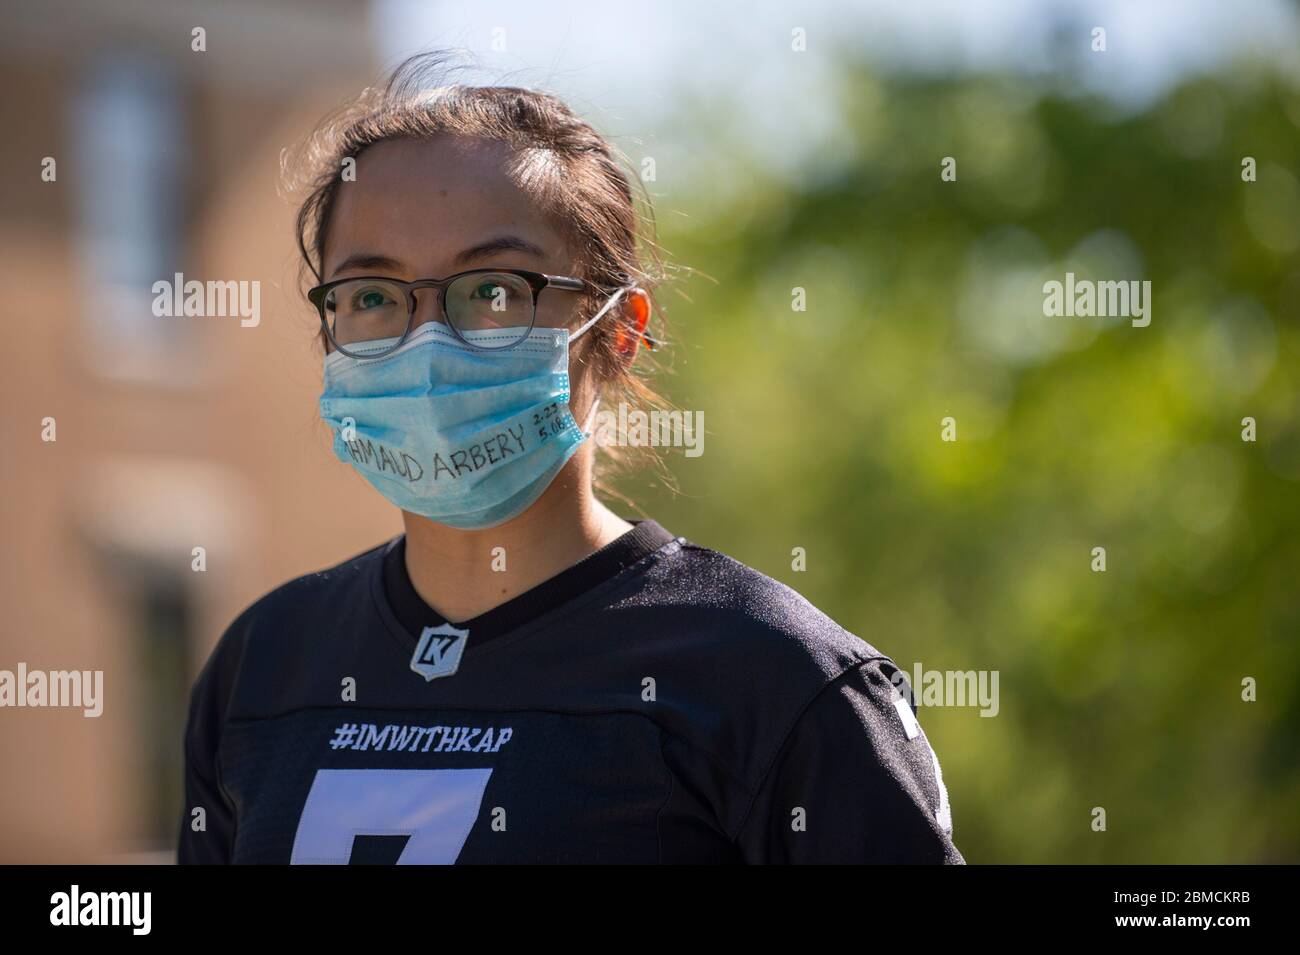 Manhattan, Kansas, USA. 8th May, 2020. FANNY FANG wears a mask with Ahmaud Arbery's name during a 2.23 mile walk in City Park to show support and solidarity for Ahmaud Arbery Tuesday morning. Ahmaud Arbery was wrongfully shot and killed on February, 23, 2020 in Brunswick, Georgia while he was jogging in his neighborhood. Today would have been Arbery's 26th birthday. FANNY FANG organized the walk with her employees at Asian Market-International Grocery and Gifts Credit: Luke Townsend/ZUMA Wire/Alamy Live News Stock Photo